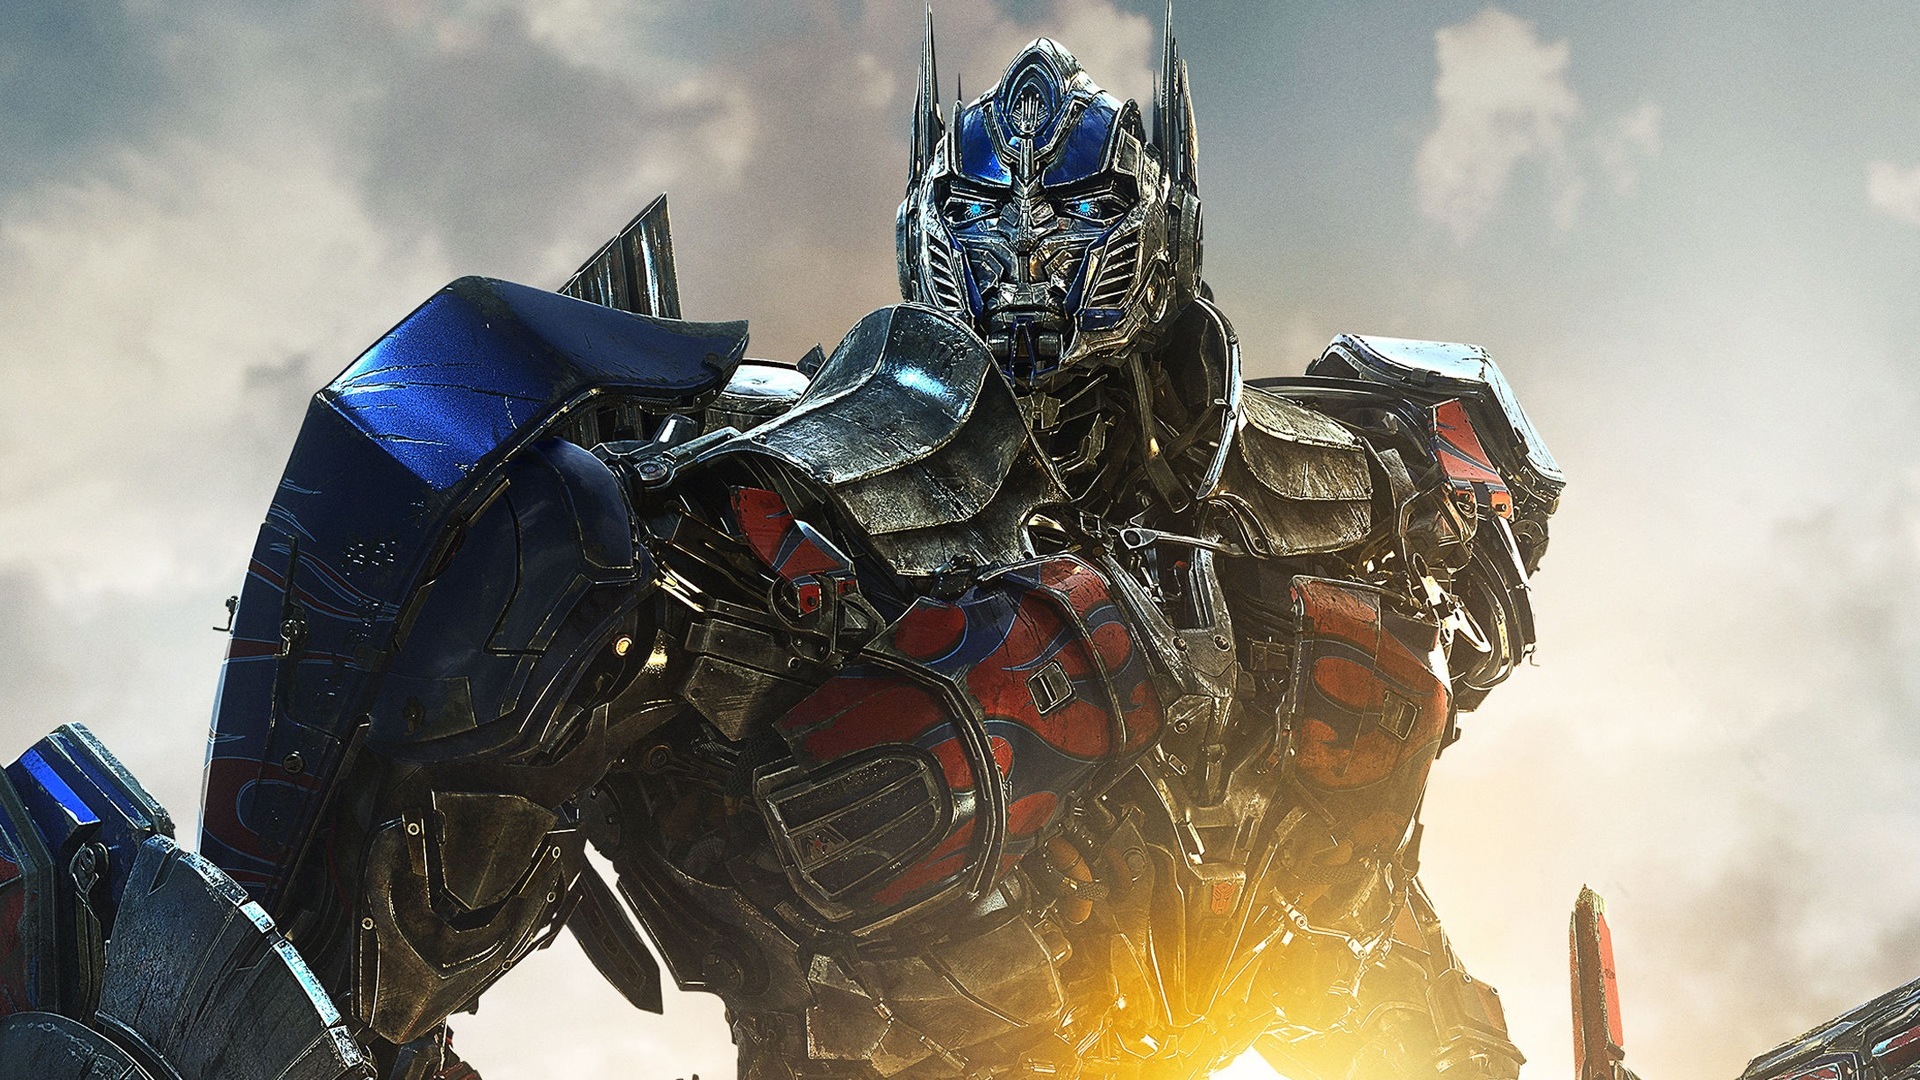 2014 Transformers: Age of Extinction HD tapety #2 - 1920x1080